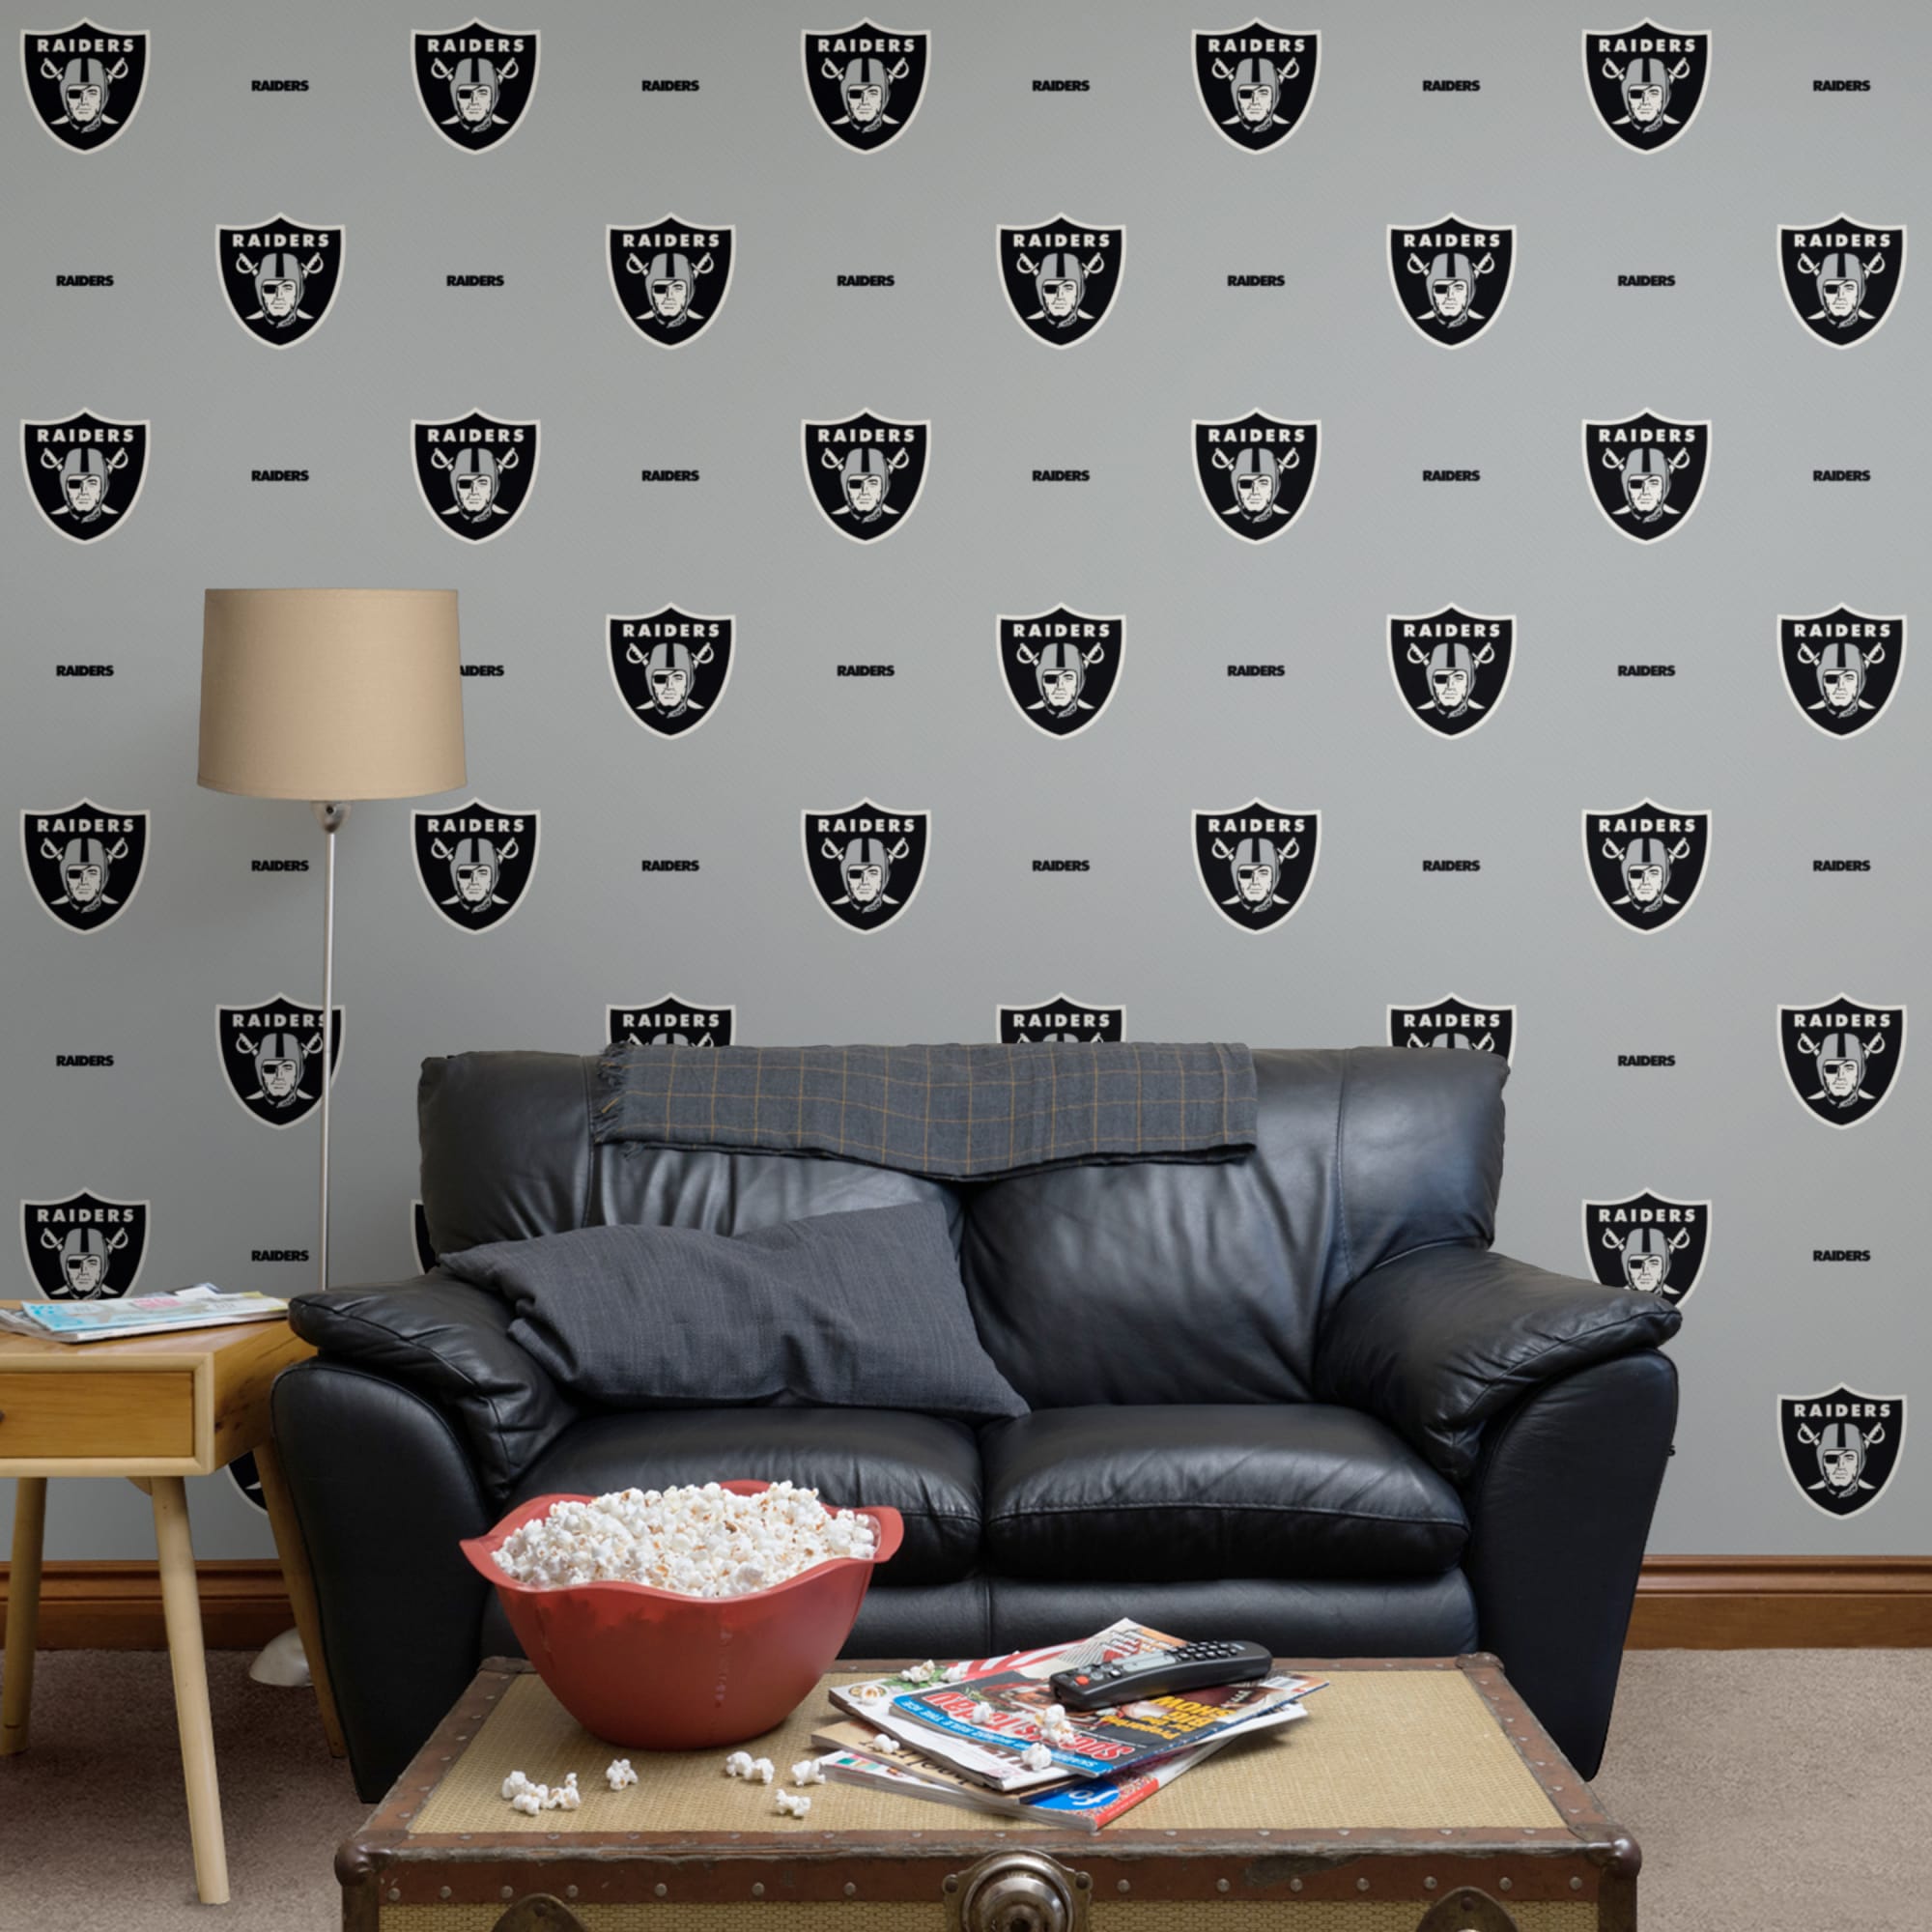 Las Vegas Raiders: Line Pattern - Officially Licensed NFL Removable Wallpaper 12" x 12" Sample by Fathead